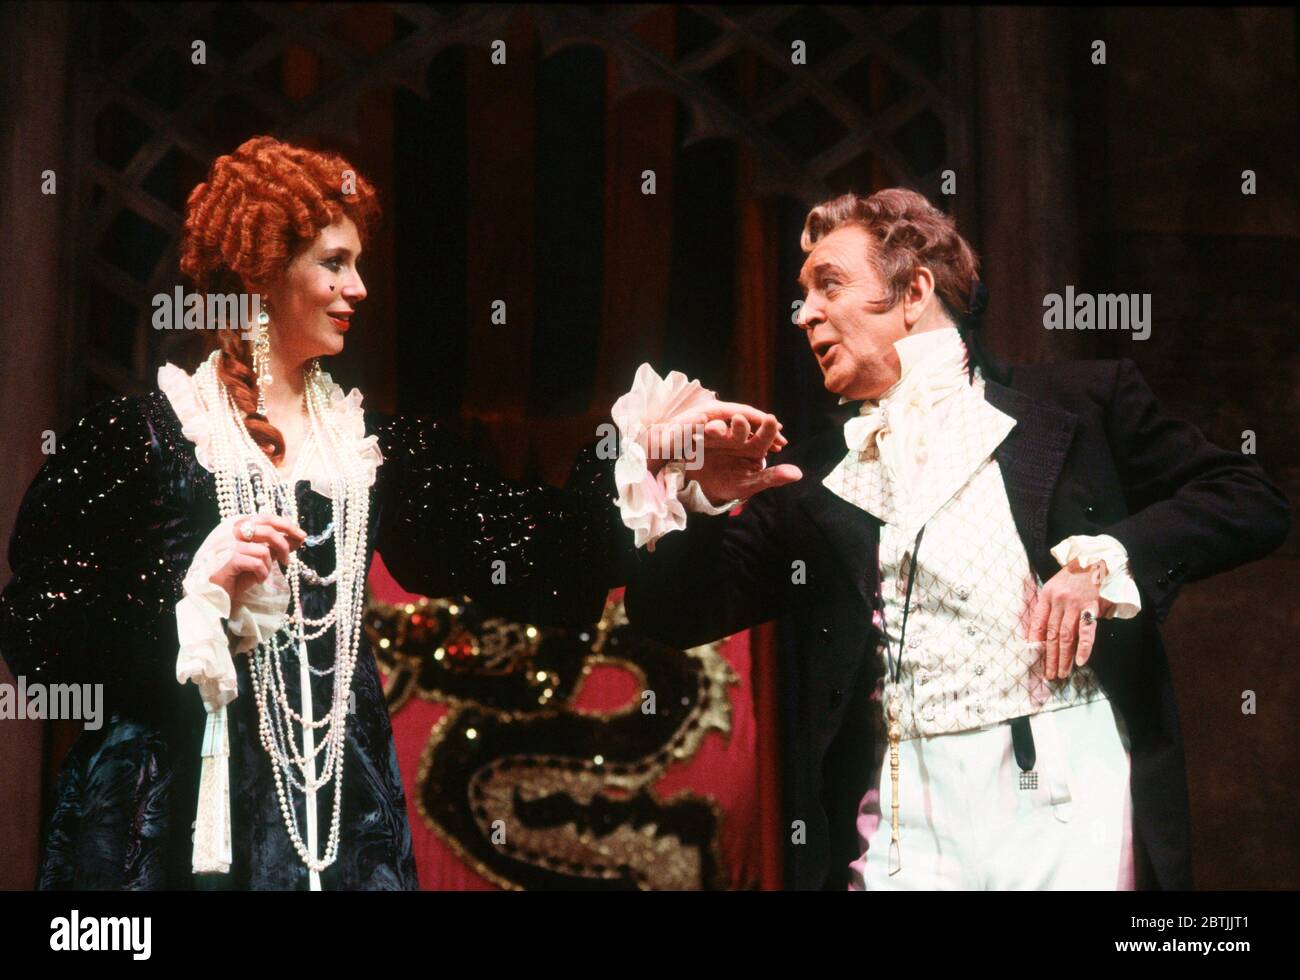 Joanna McCallum (Marguerite Blakeney), Donald Sinden (Sir Percy Blakeney, Bart.) in THE SCARLET PIMPERNEL by Baroness Orczy at Her Majesty's Theatre, Haymarket, London SW1 11/12/1985 a Chichester Festival Theatre production adapted by Beverley Cross music: Jeremy Sams design: Mark Thompson lighting: Mark Henderson fights: Malcolm Ranson director: Nicholas Hytner Stock Photo